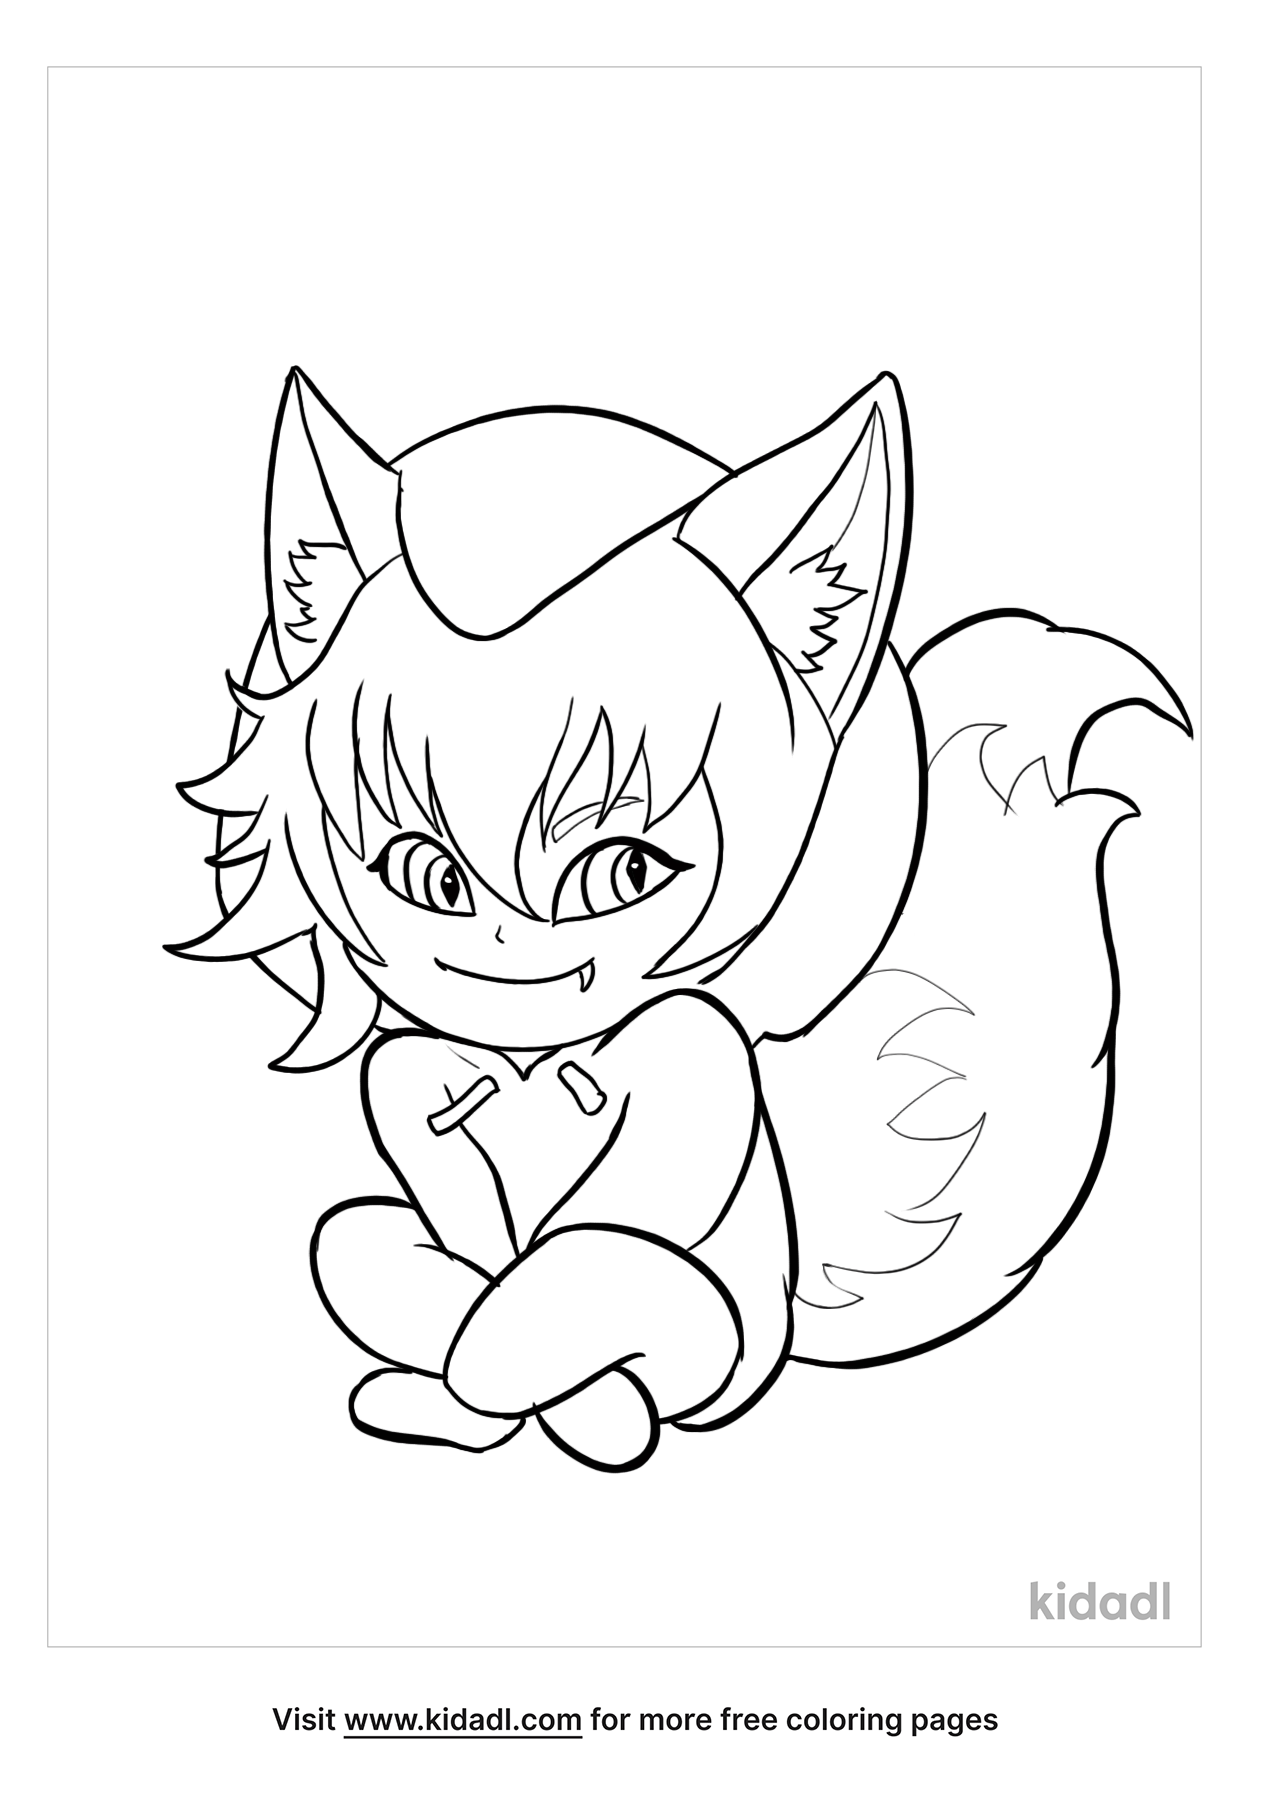 Chibi Wolf Girl Coloring Pages   Free Cartoons Coloring Pages ...